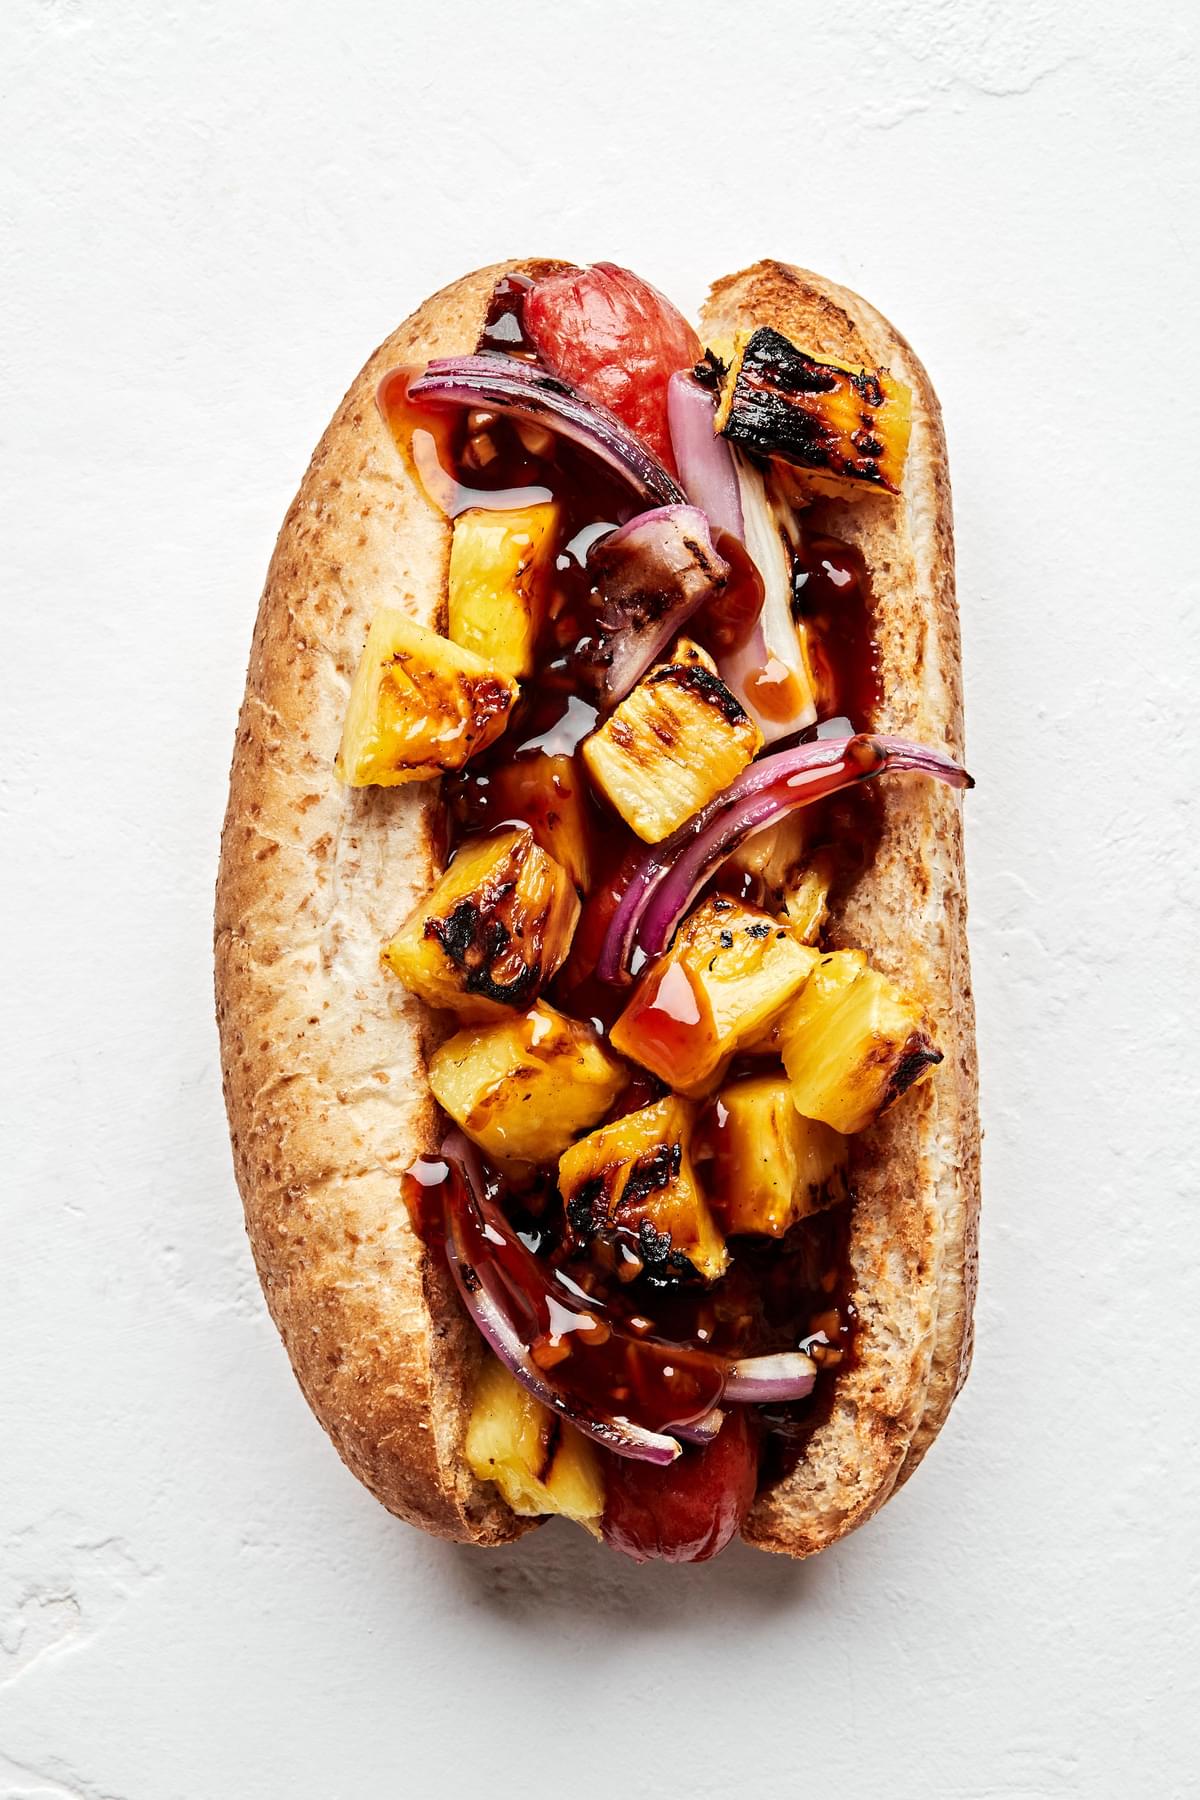 hawaiian hot dog topped with grilled pineapple, red onions and teriyaki sauce